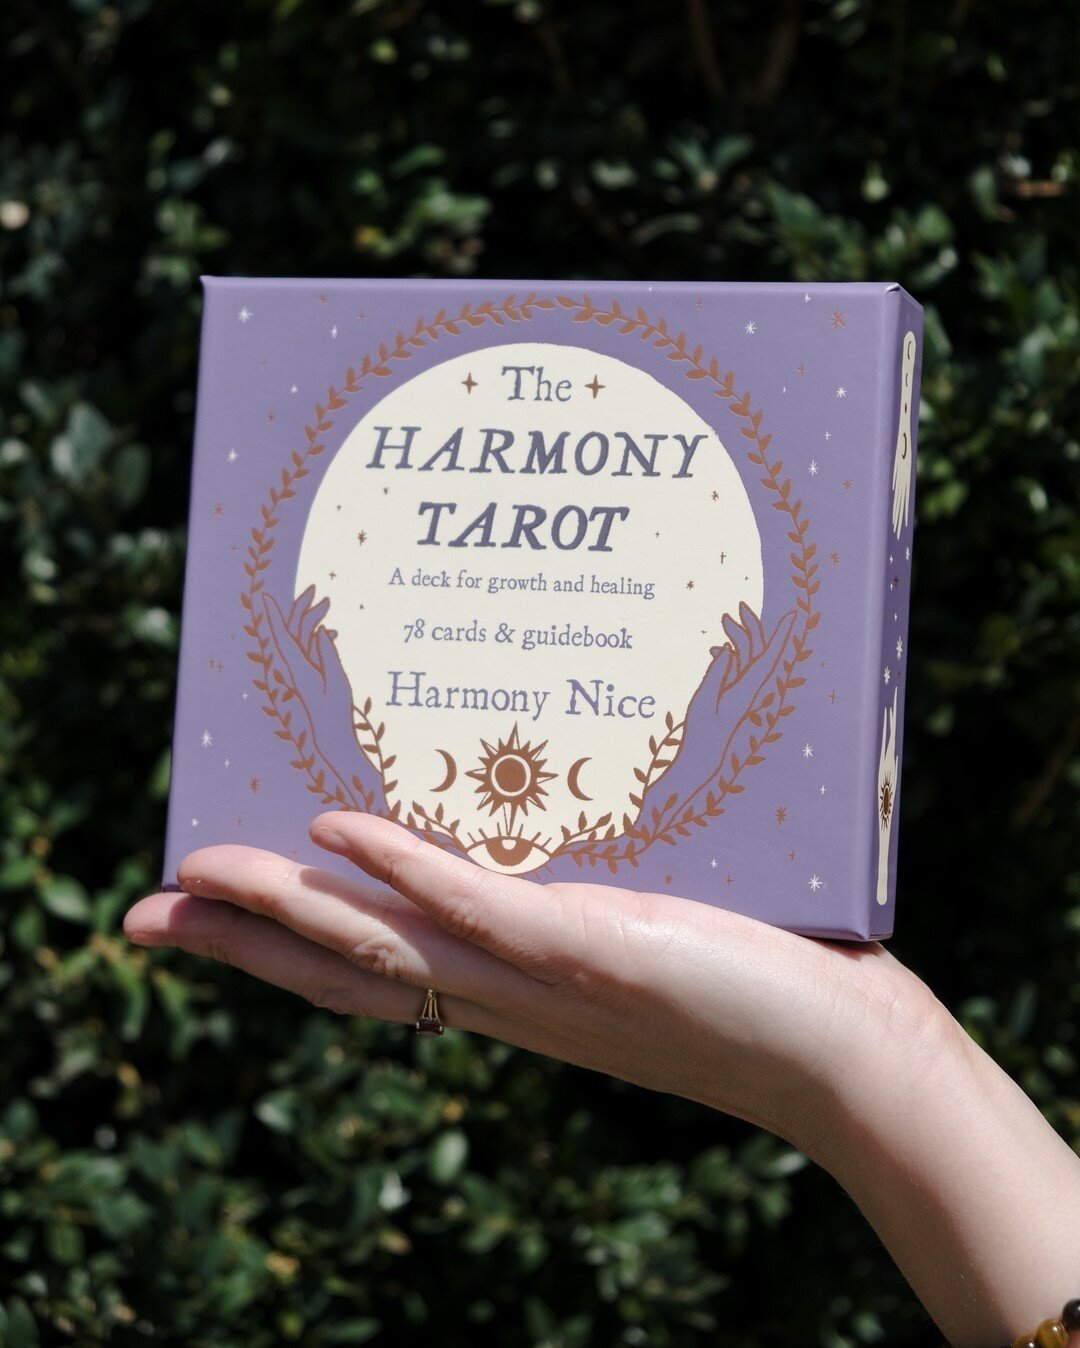 I present to you, The Harmony Tarot... review video! 🌙 (In case you missed it last Thursday - link in bio to watch on YouTube!) ⠀⠀⠀⠀⠀⠀⠀⠀⠀
⠀⠀⠀⠀⠀⠀⠀⠀⠀
The Harmony Tarot is honestly the sweetest Tarot deck. 💖 It's like chatting to a helpful friend that